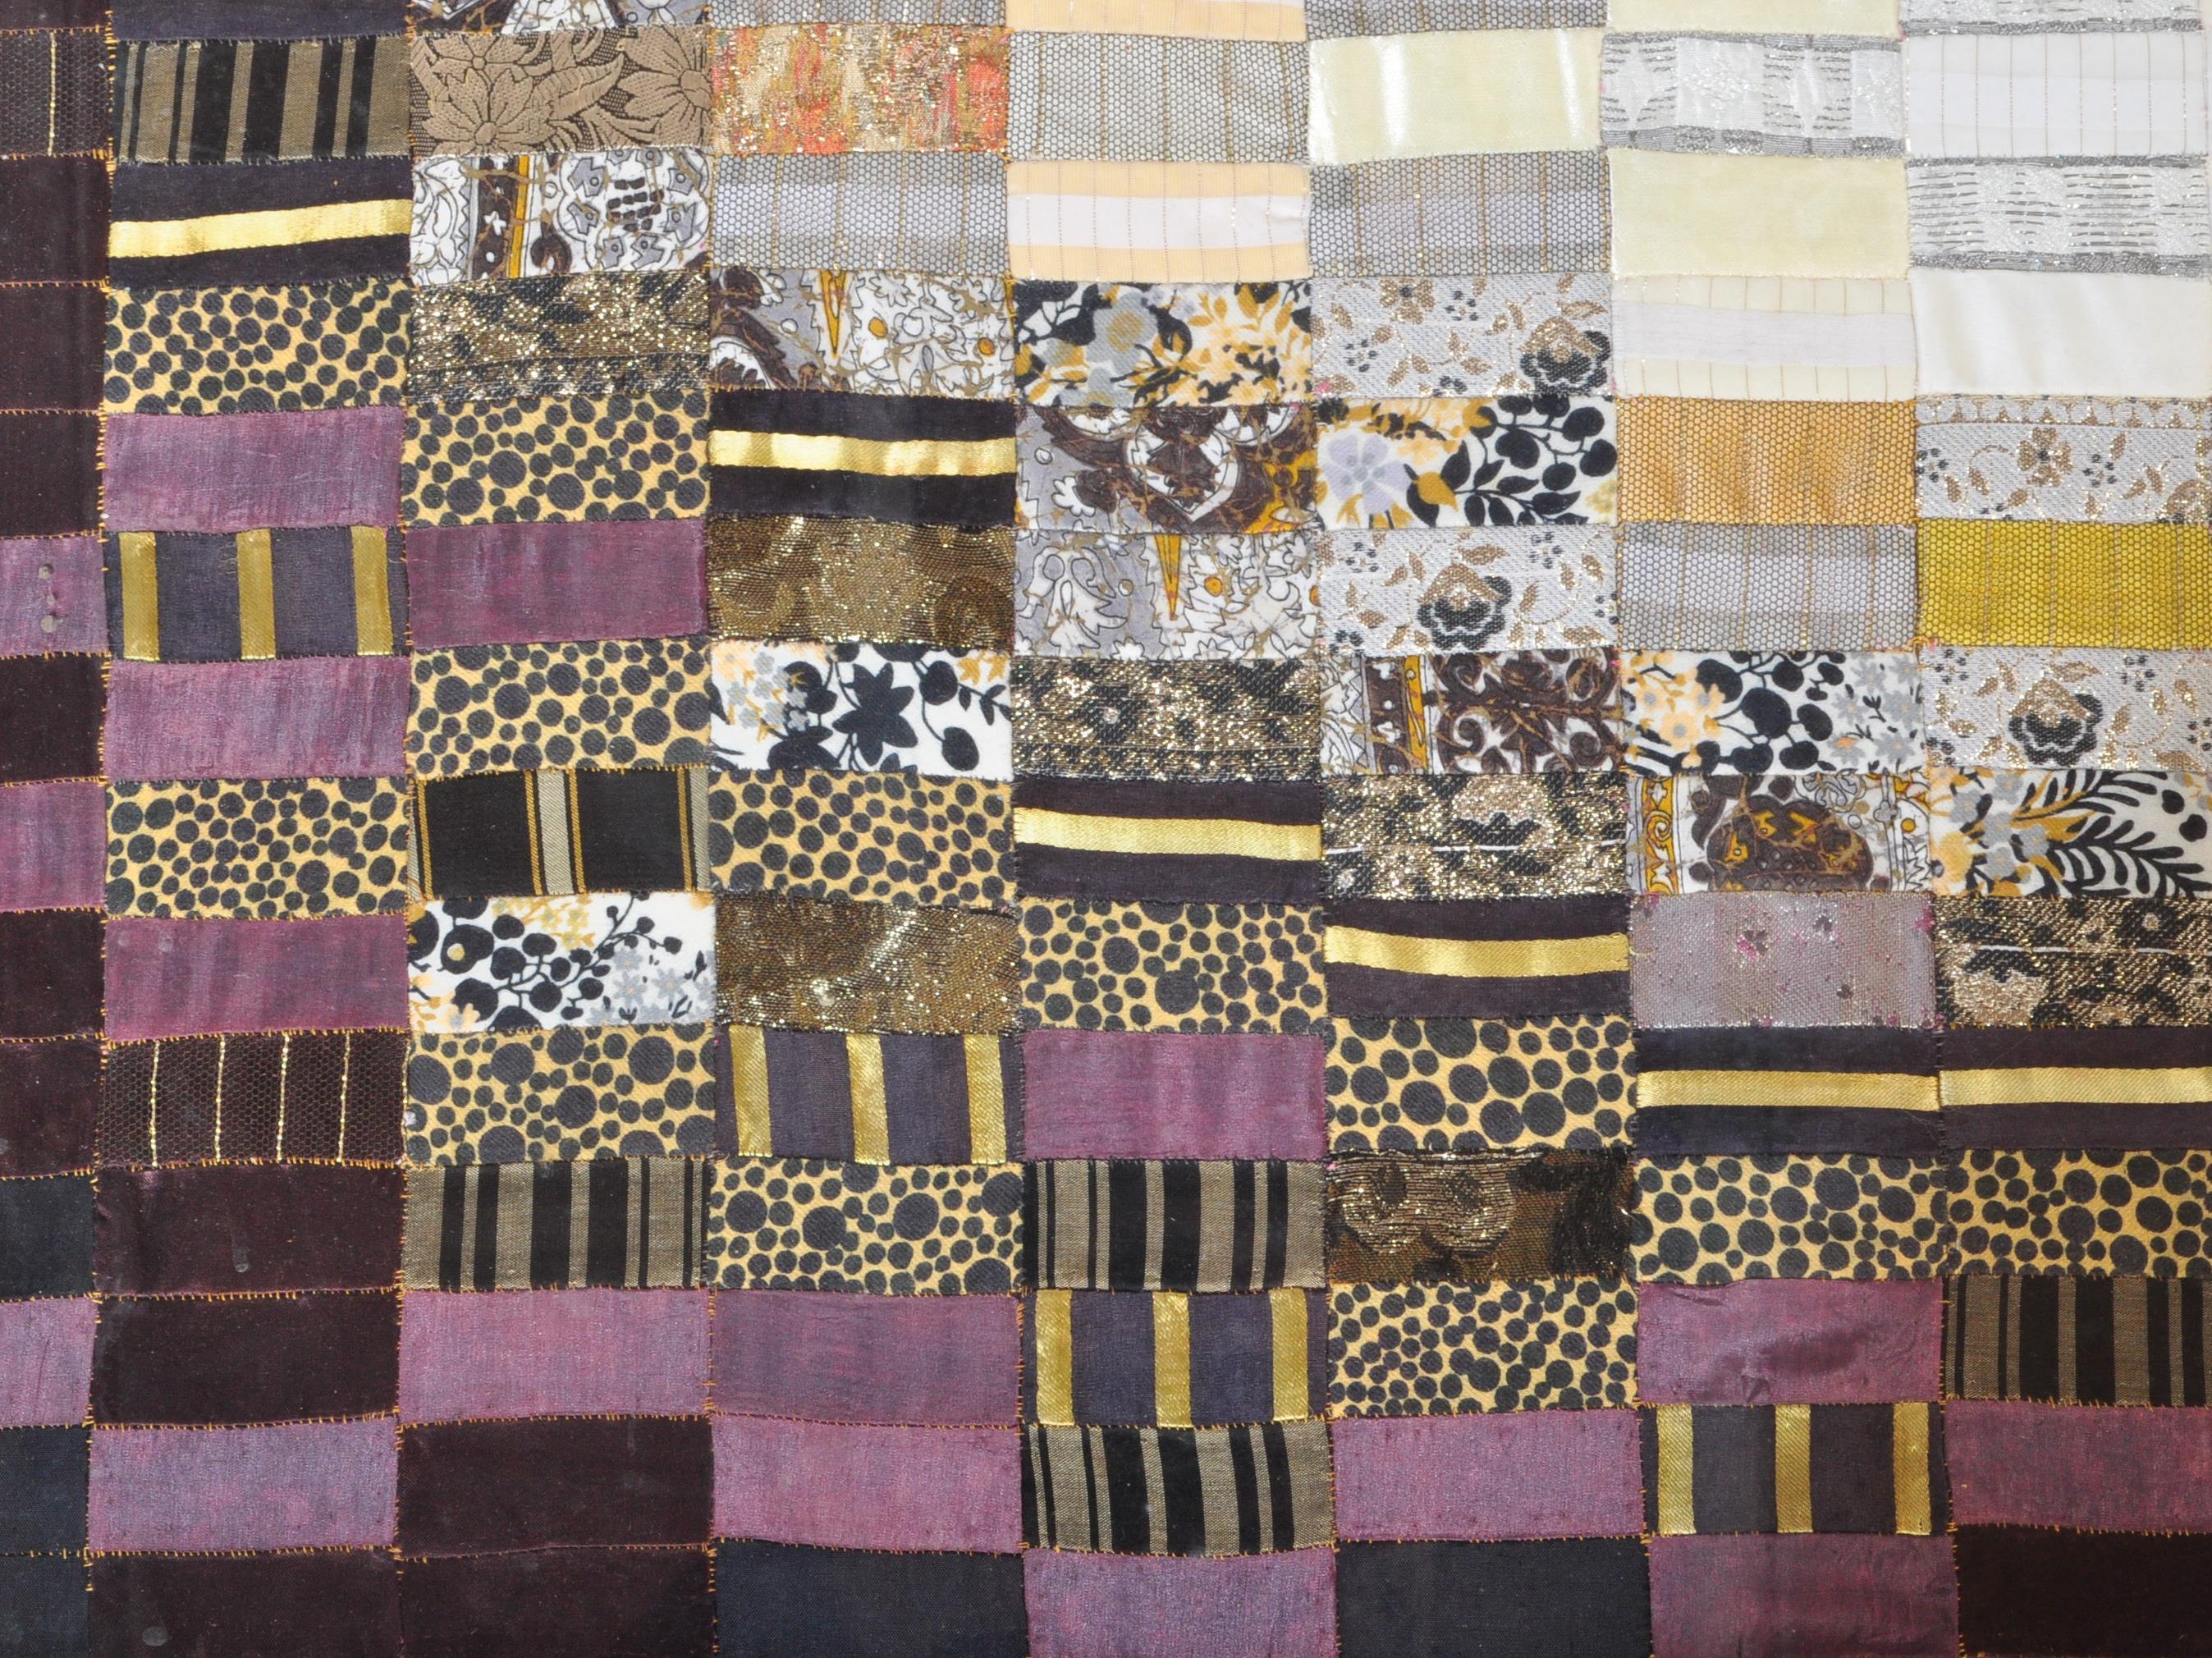 FB CAINS SWA - HAND SEWN FABRIC PATCHWORK QUILT - Image 3 of 4